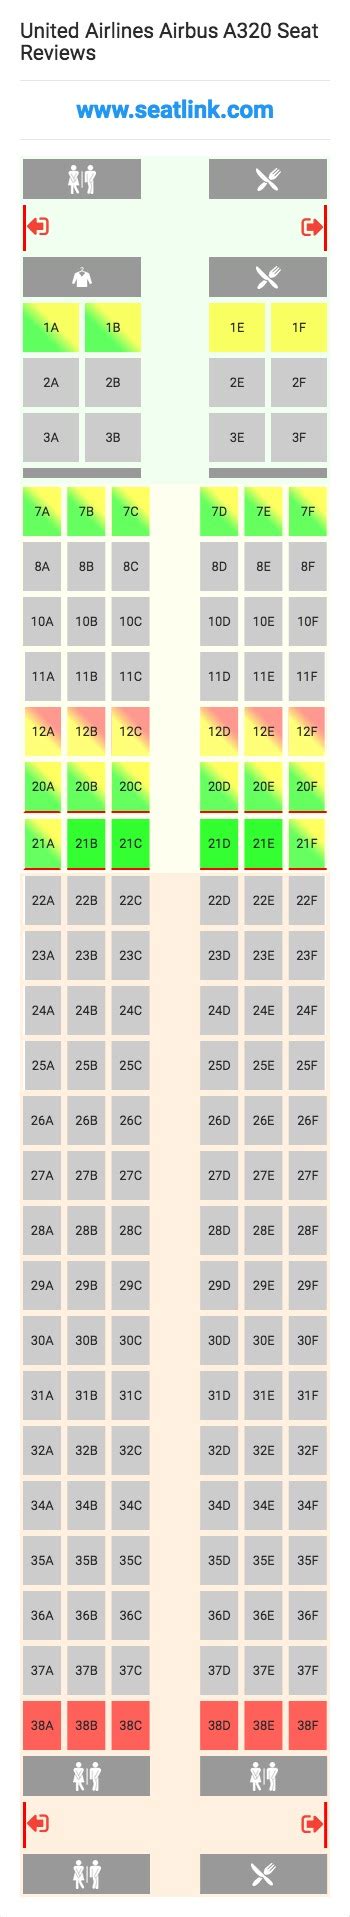 United Airlines Airbus A320 Seating Chart Updated March 2022 Seatlink